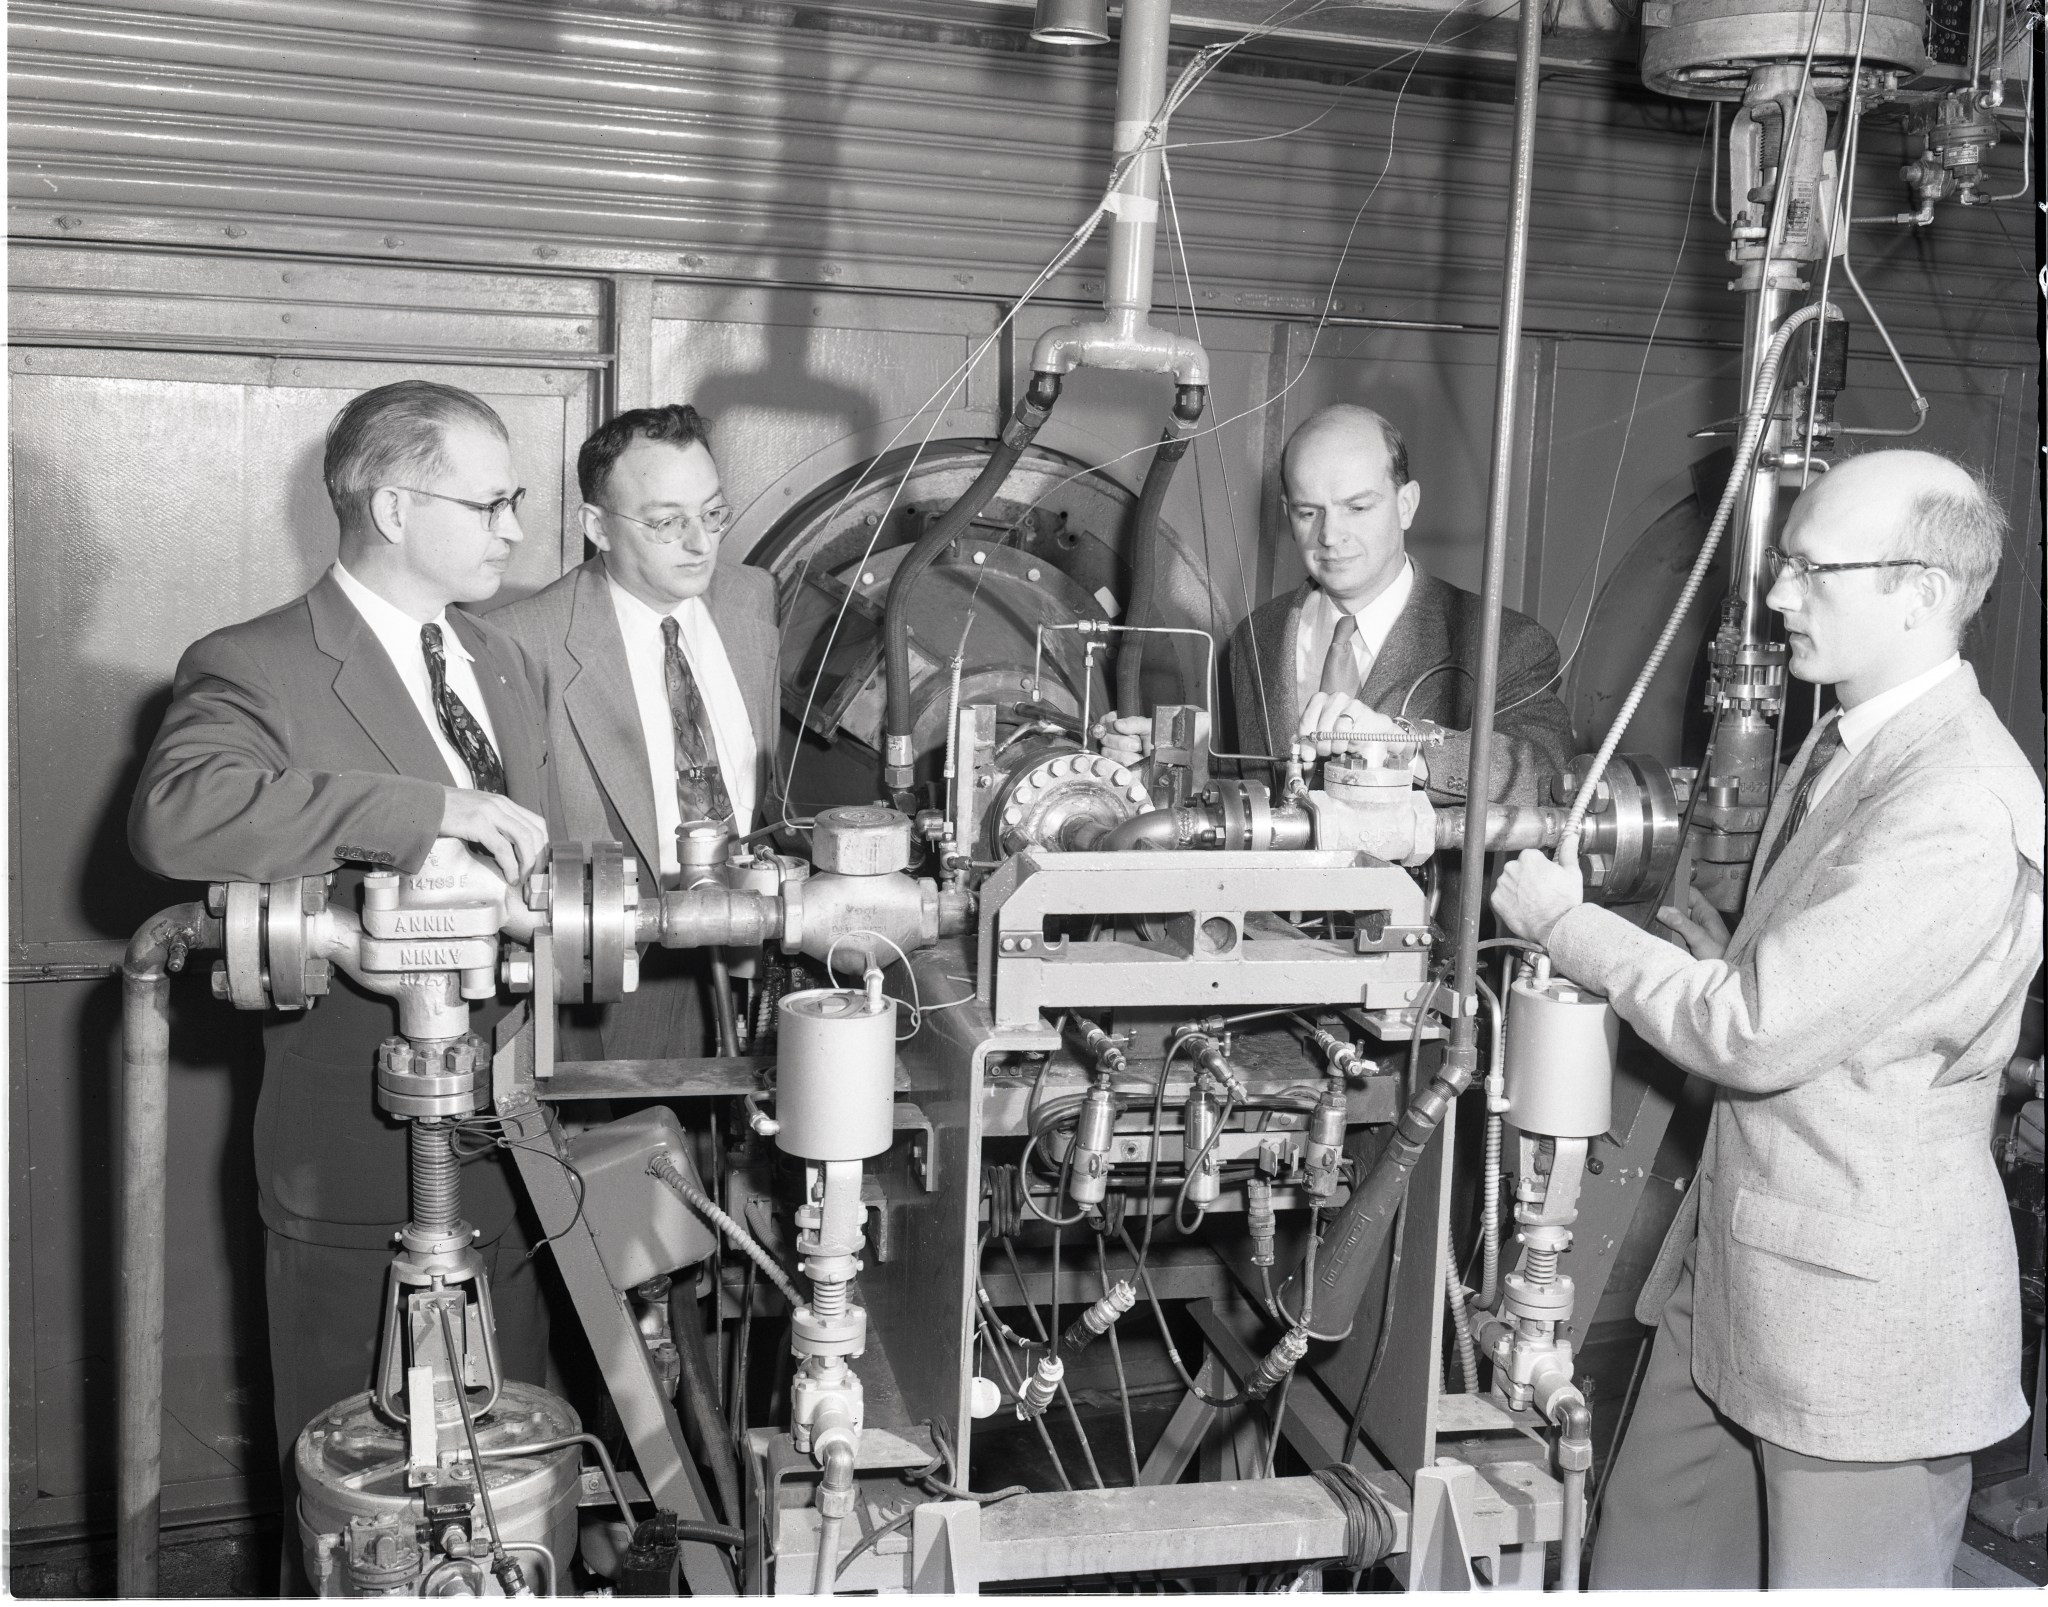 Four men looking at engine test stand.